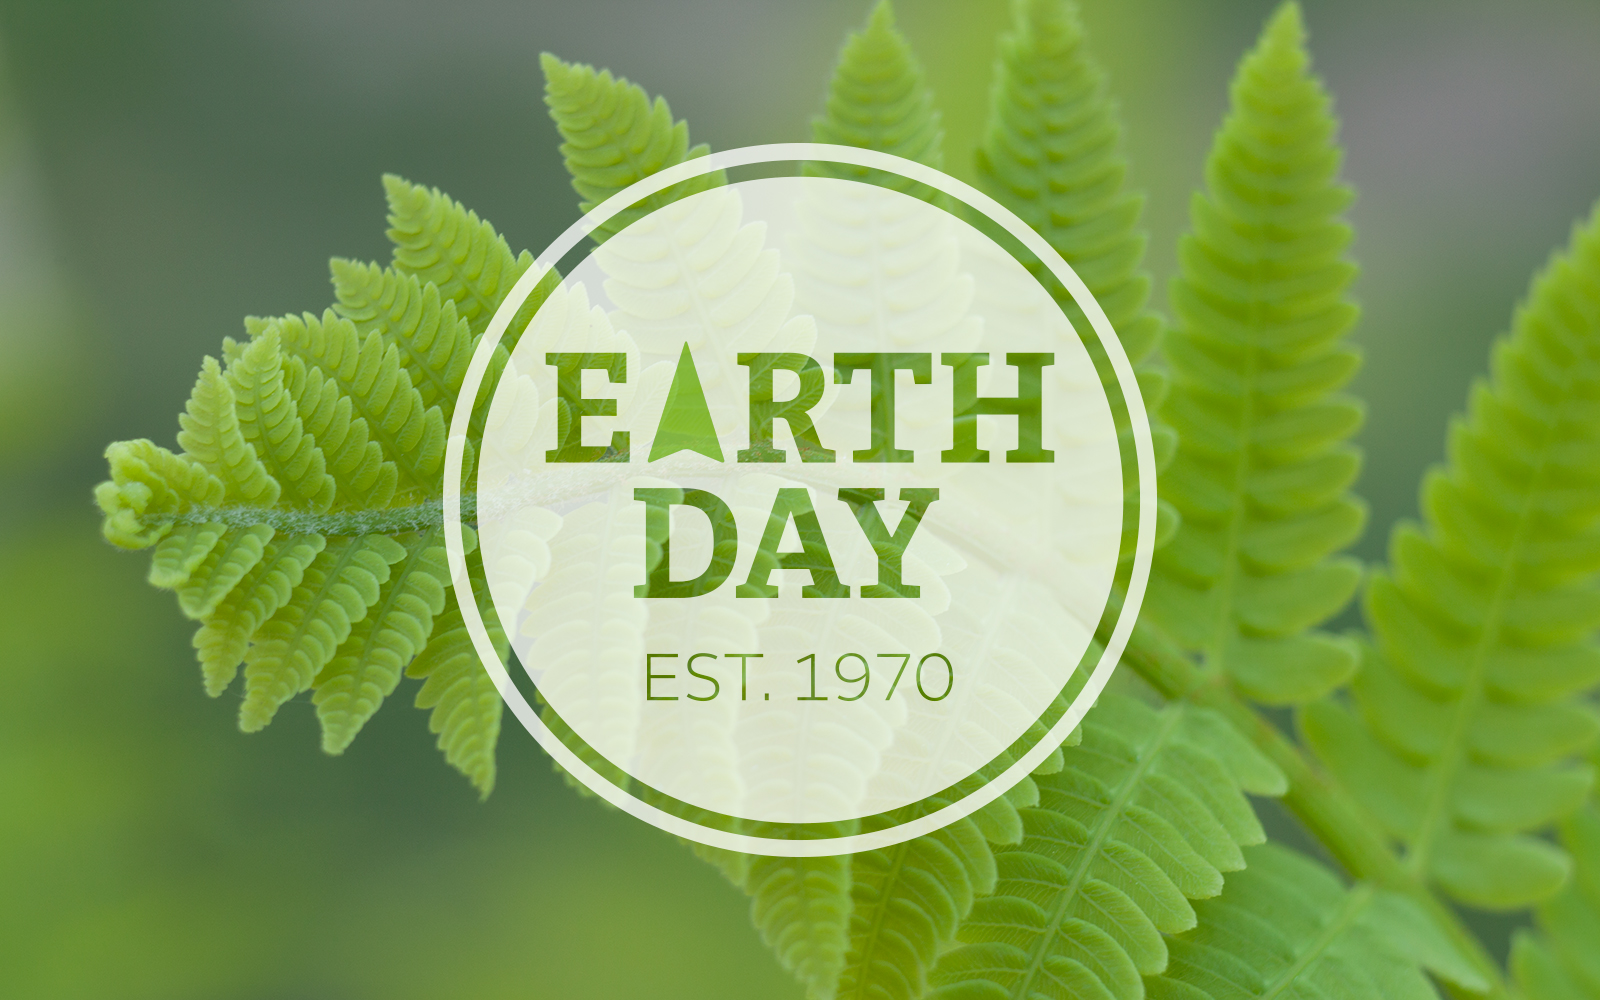 Aesthetic Earth Day Wallpapers